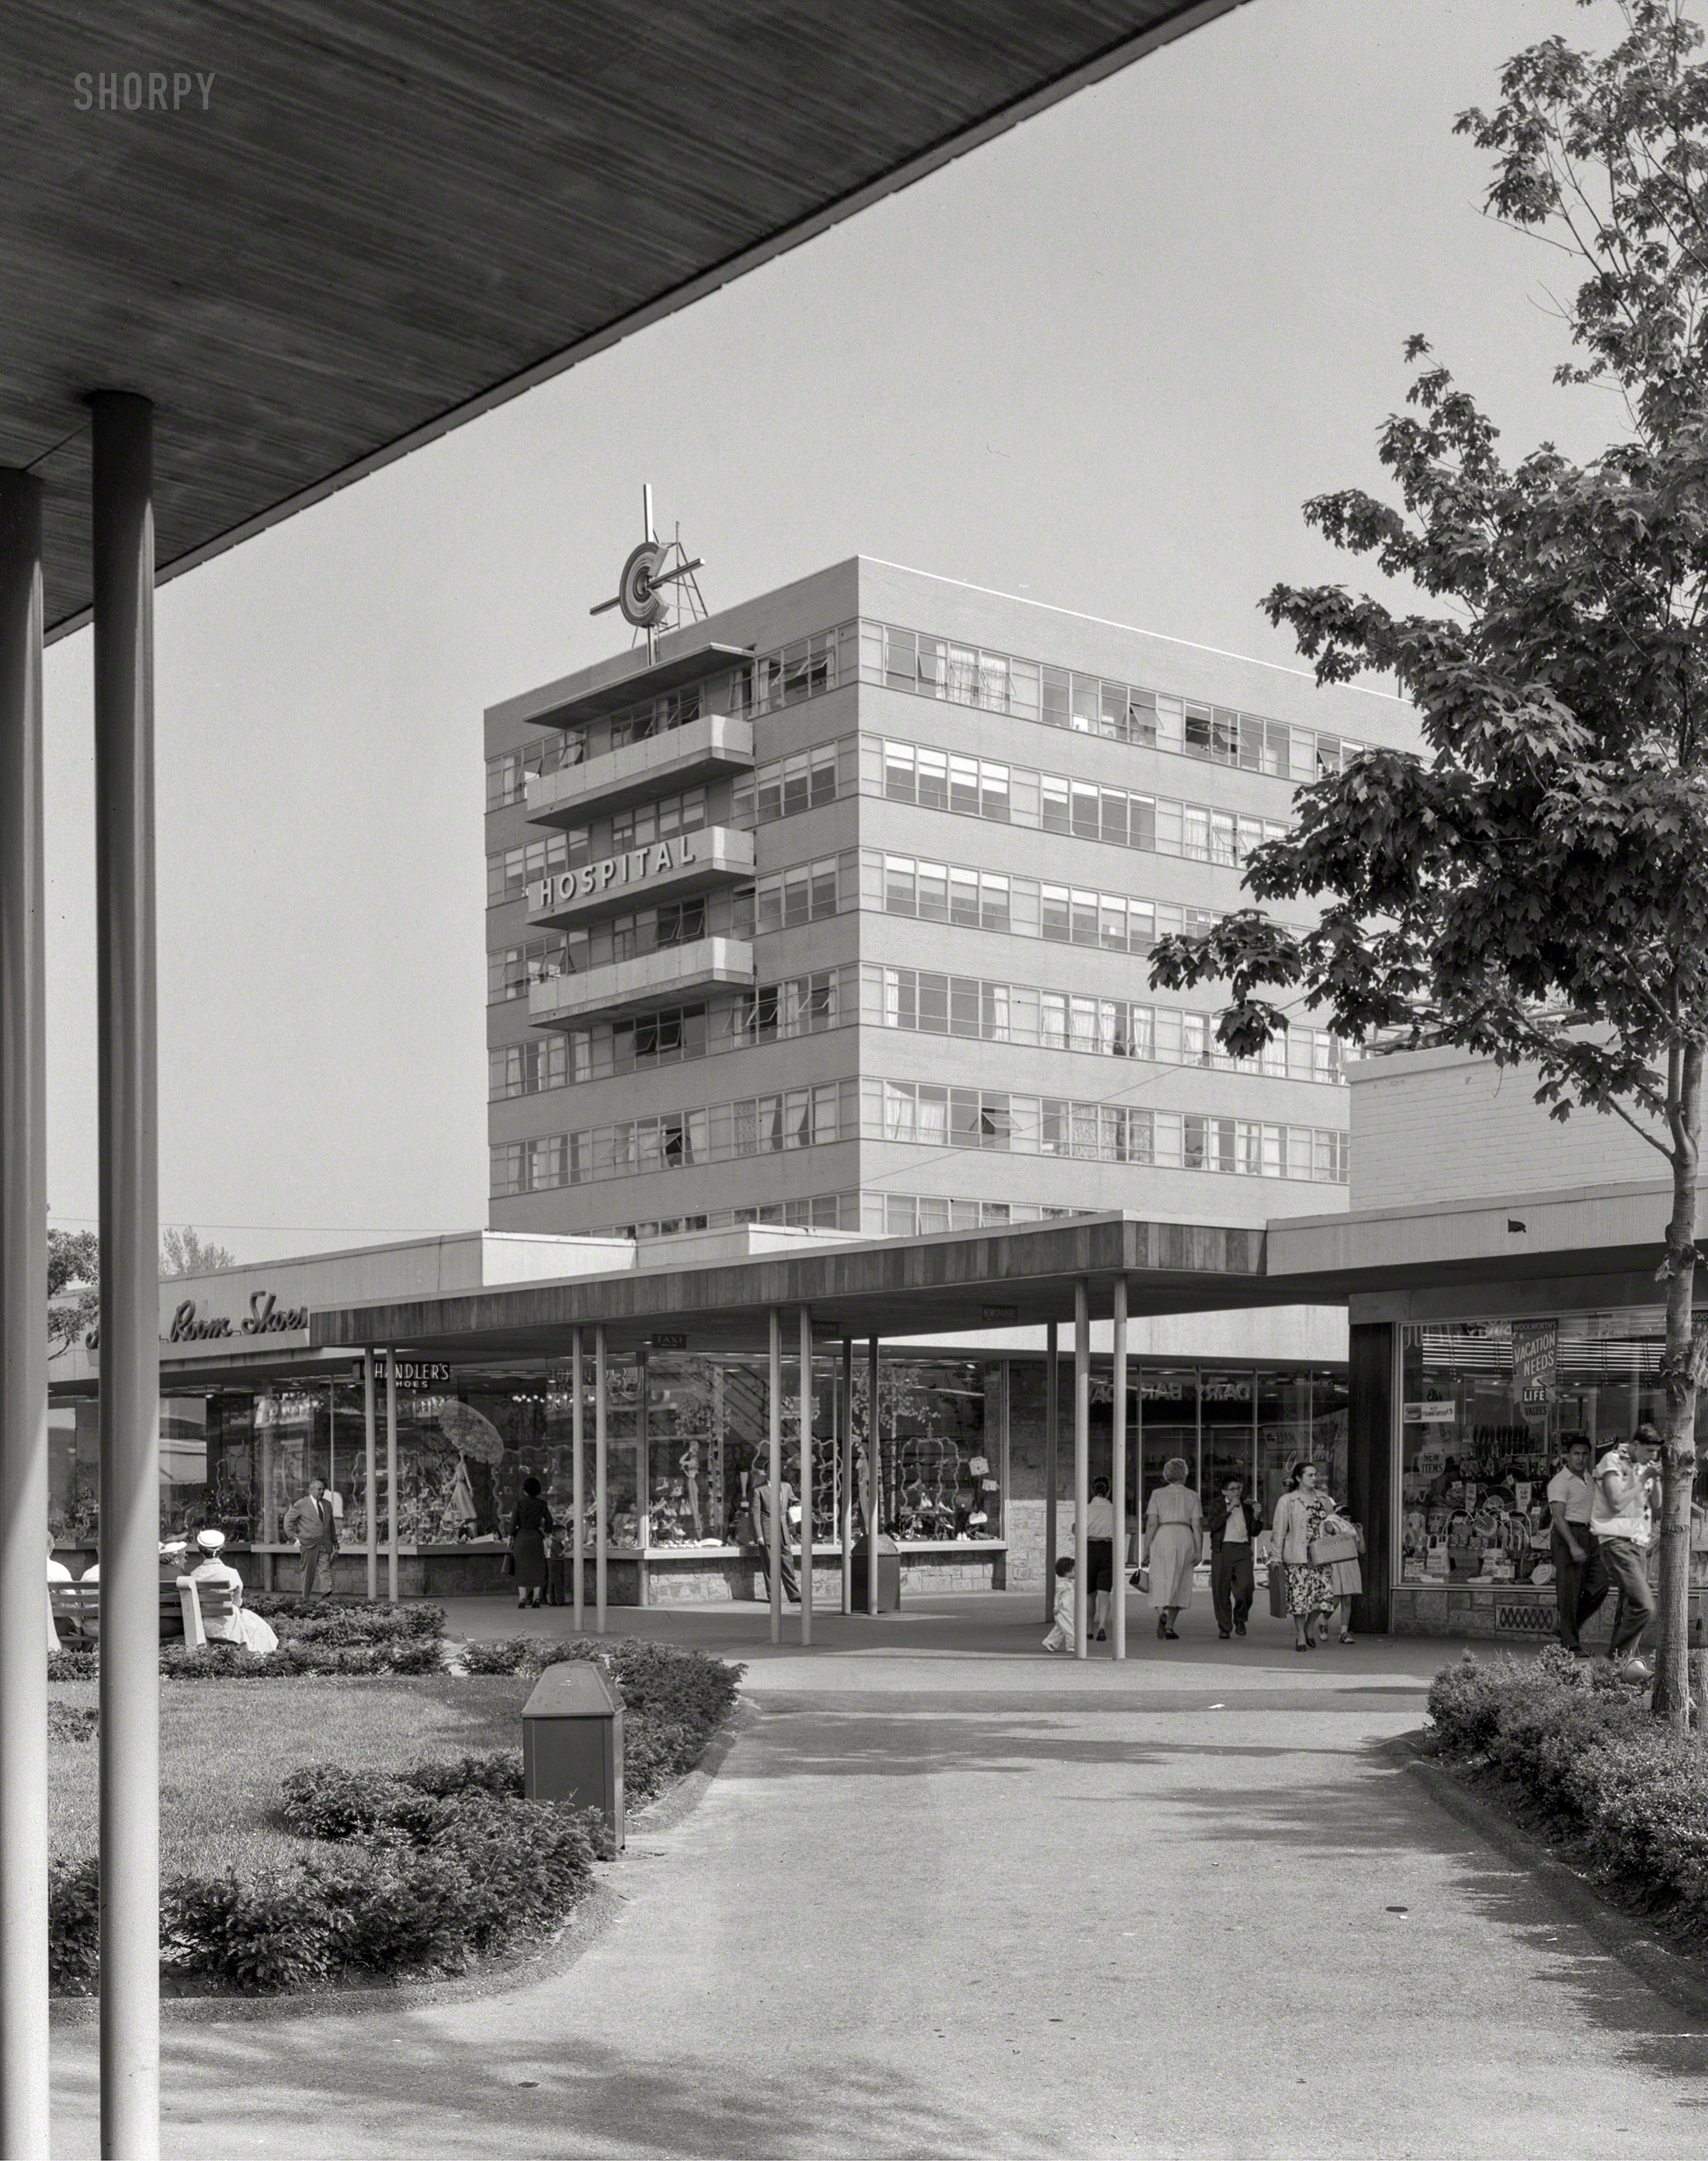 June 6, 1956. "Cross County Center. Yonkers, Westchester County, New York. Medical building." 4x5 acetate negative by Gottscho-Schleisner. View full size.